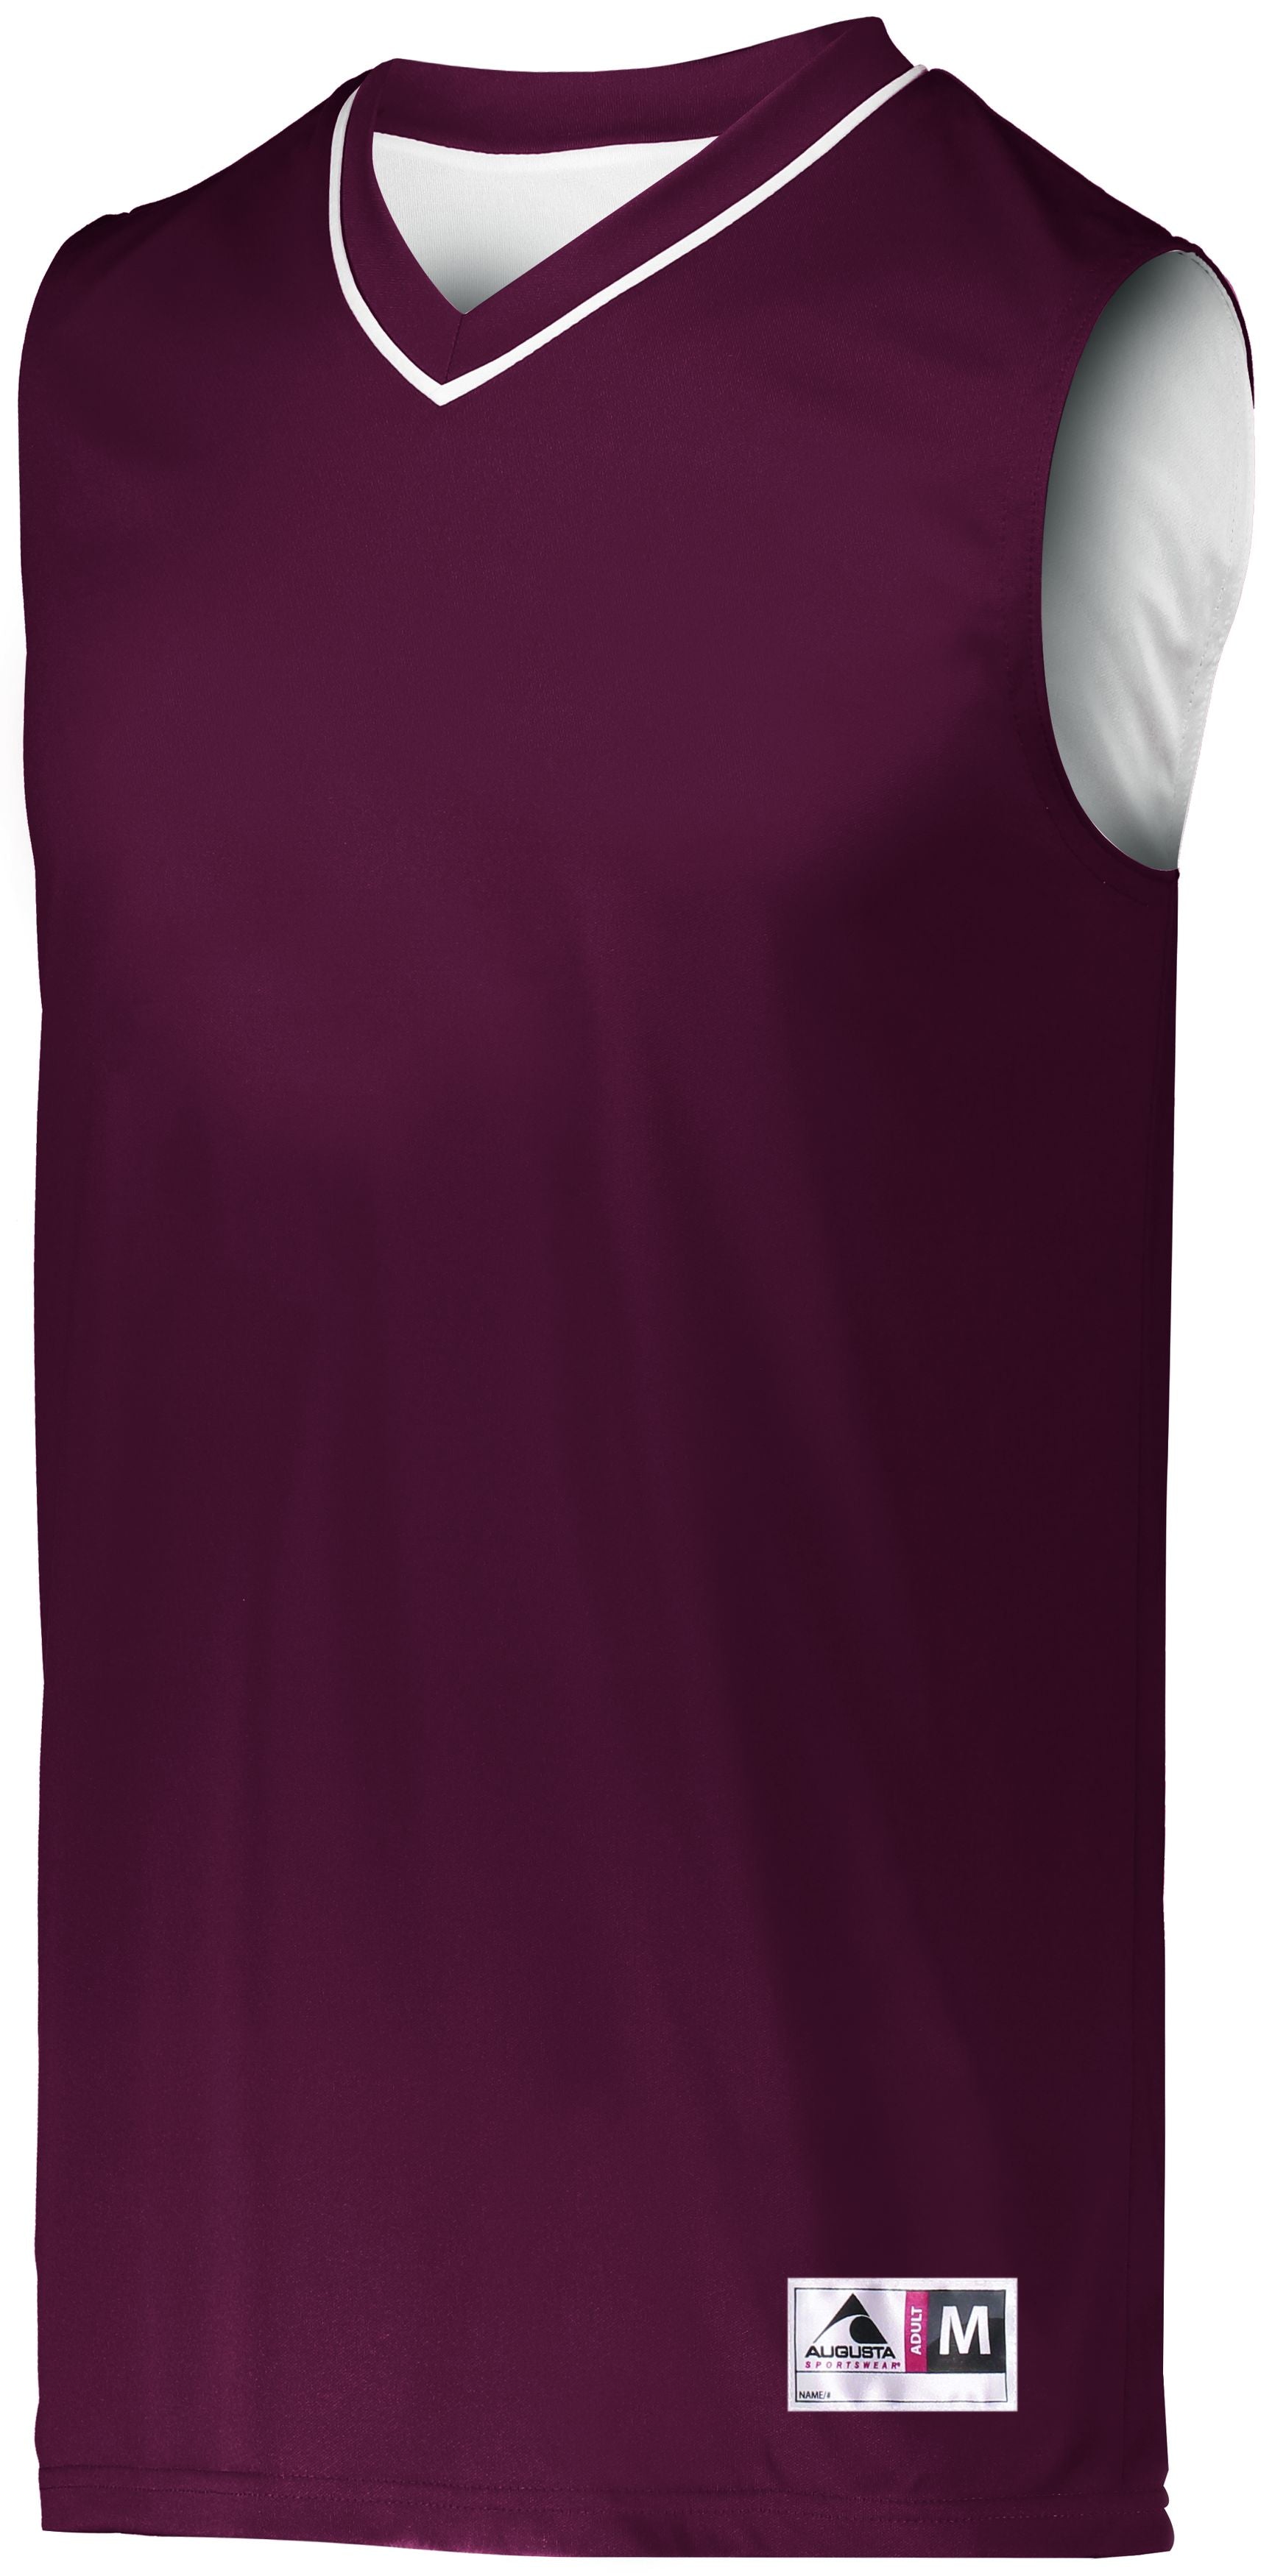 Augusta Sportswear Reversible Two-Color Jersey in Maroon/White  -Part of the Adult, Adult-Jersey, Augusta-Products, Basketball, Shirts, All-Sports, All-Sports-1 product lines at KanaleyCreations.com